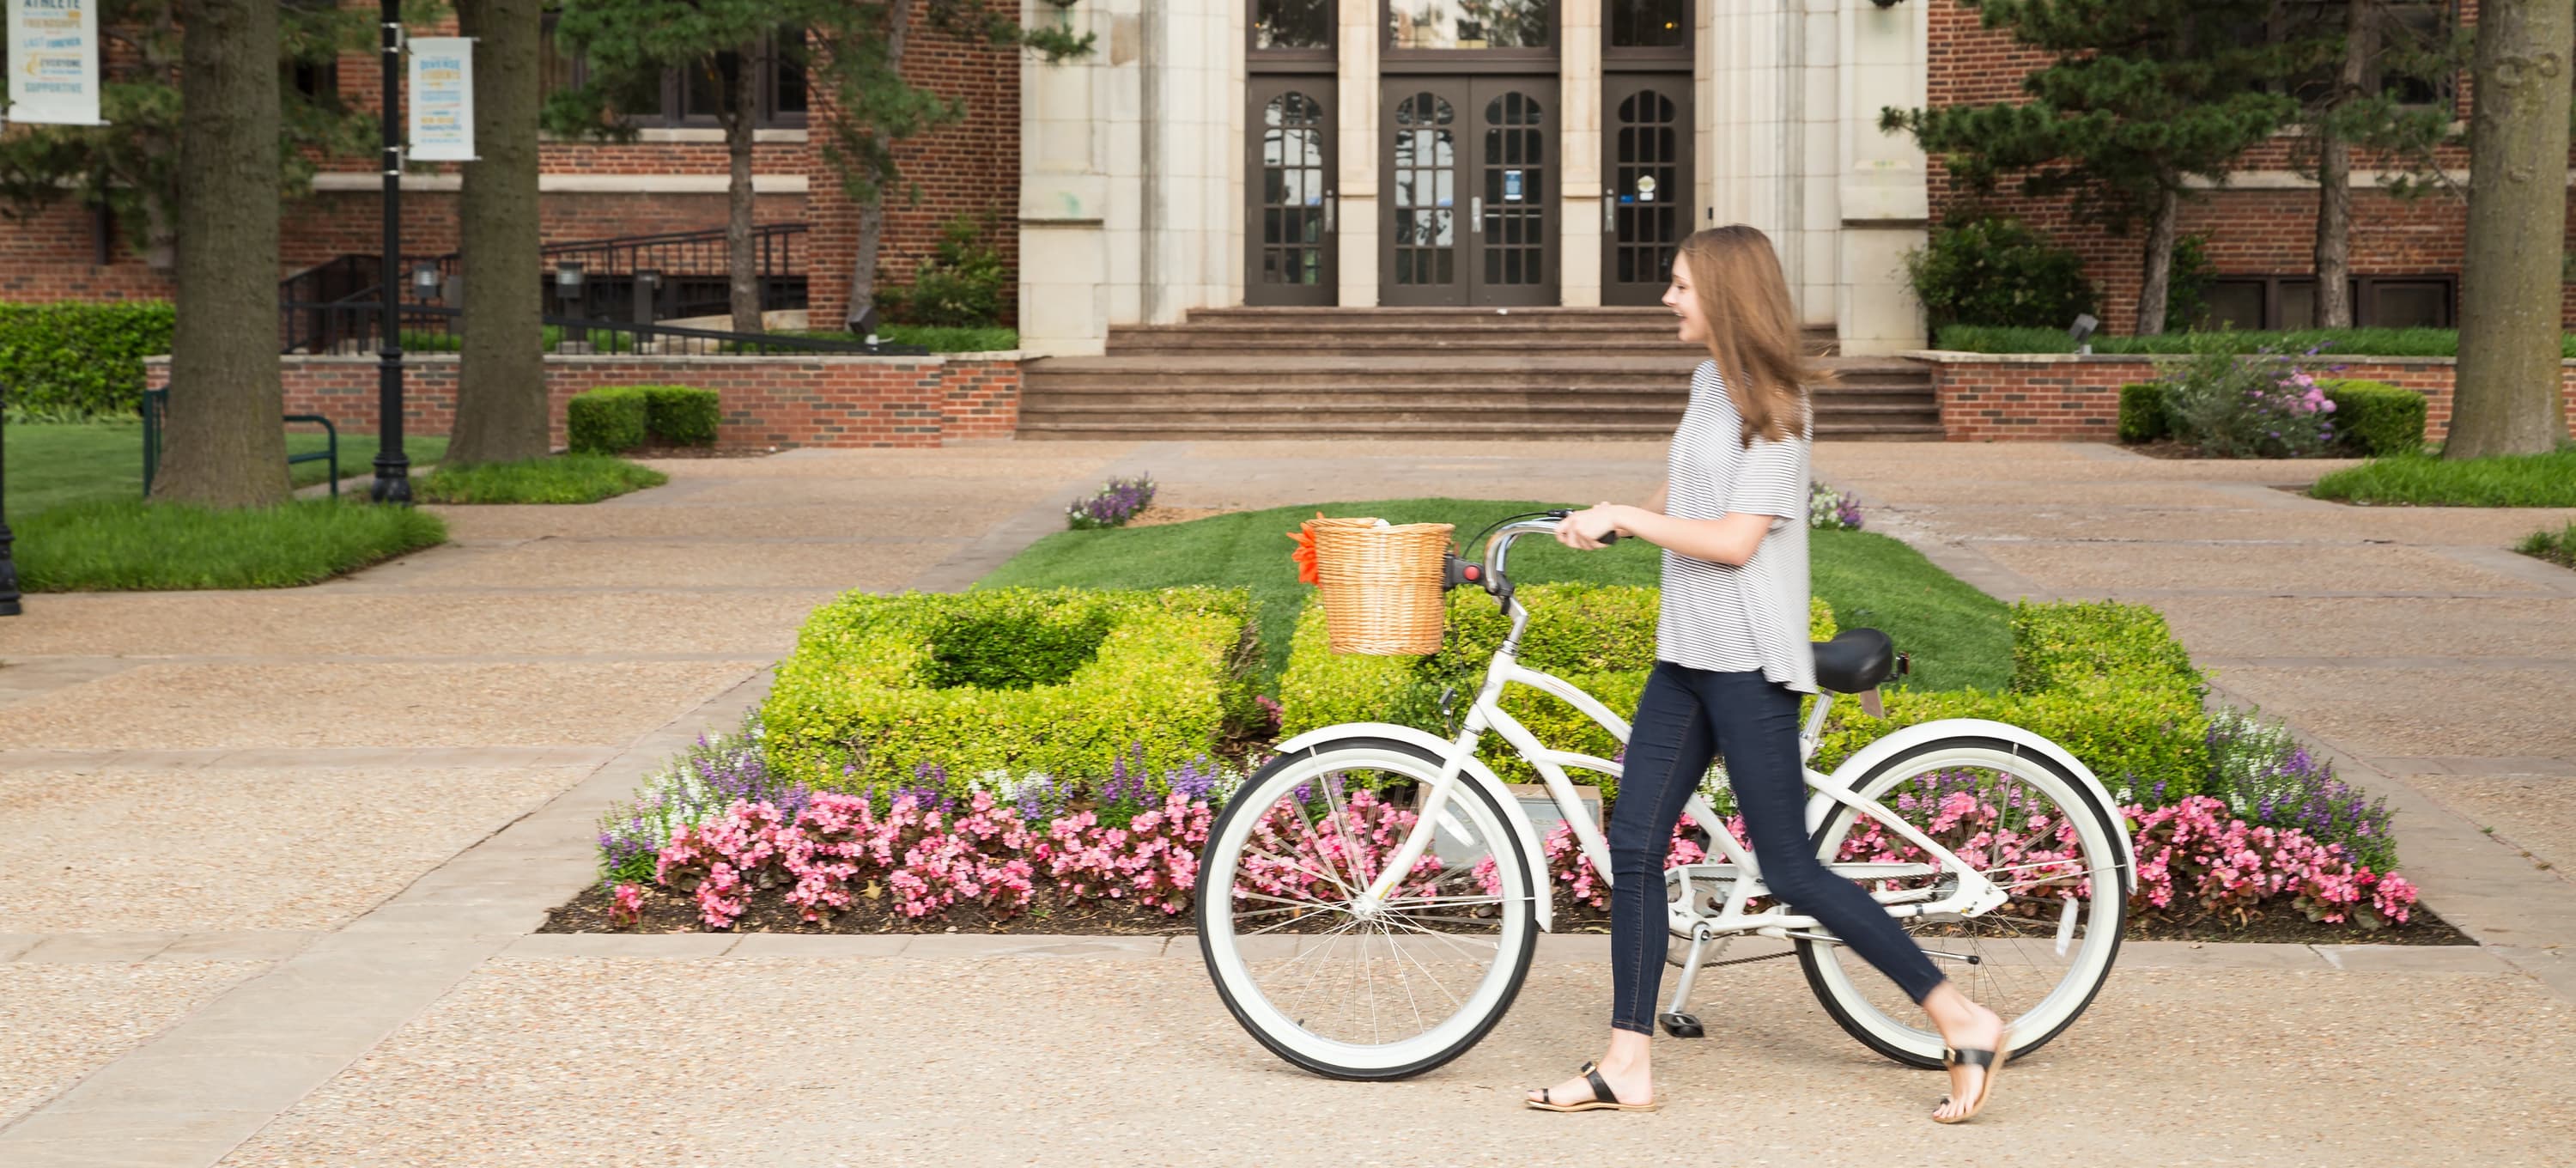 Student on bike in front of administration building